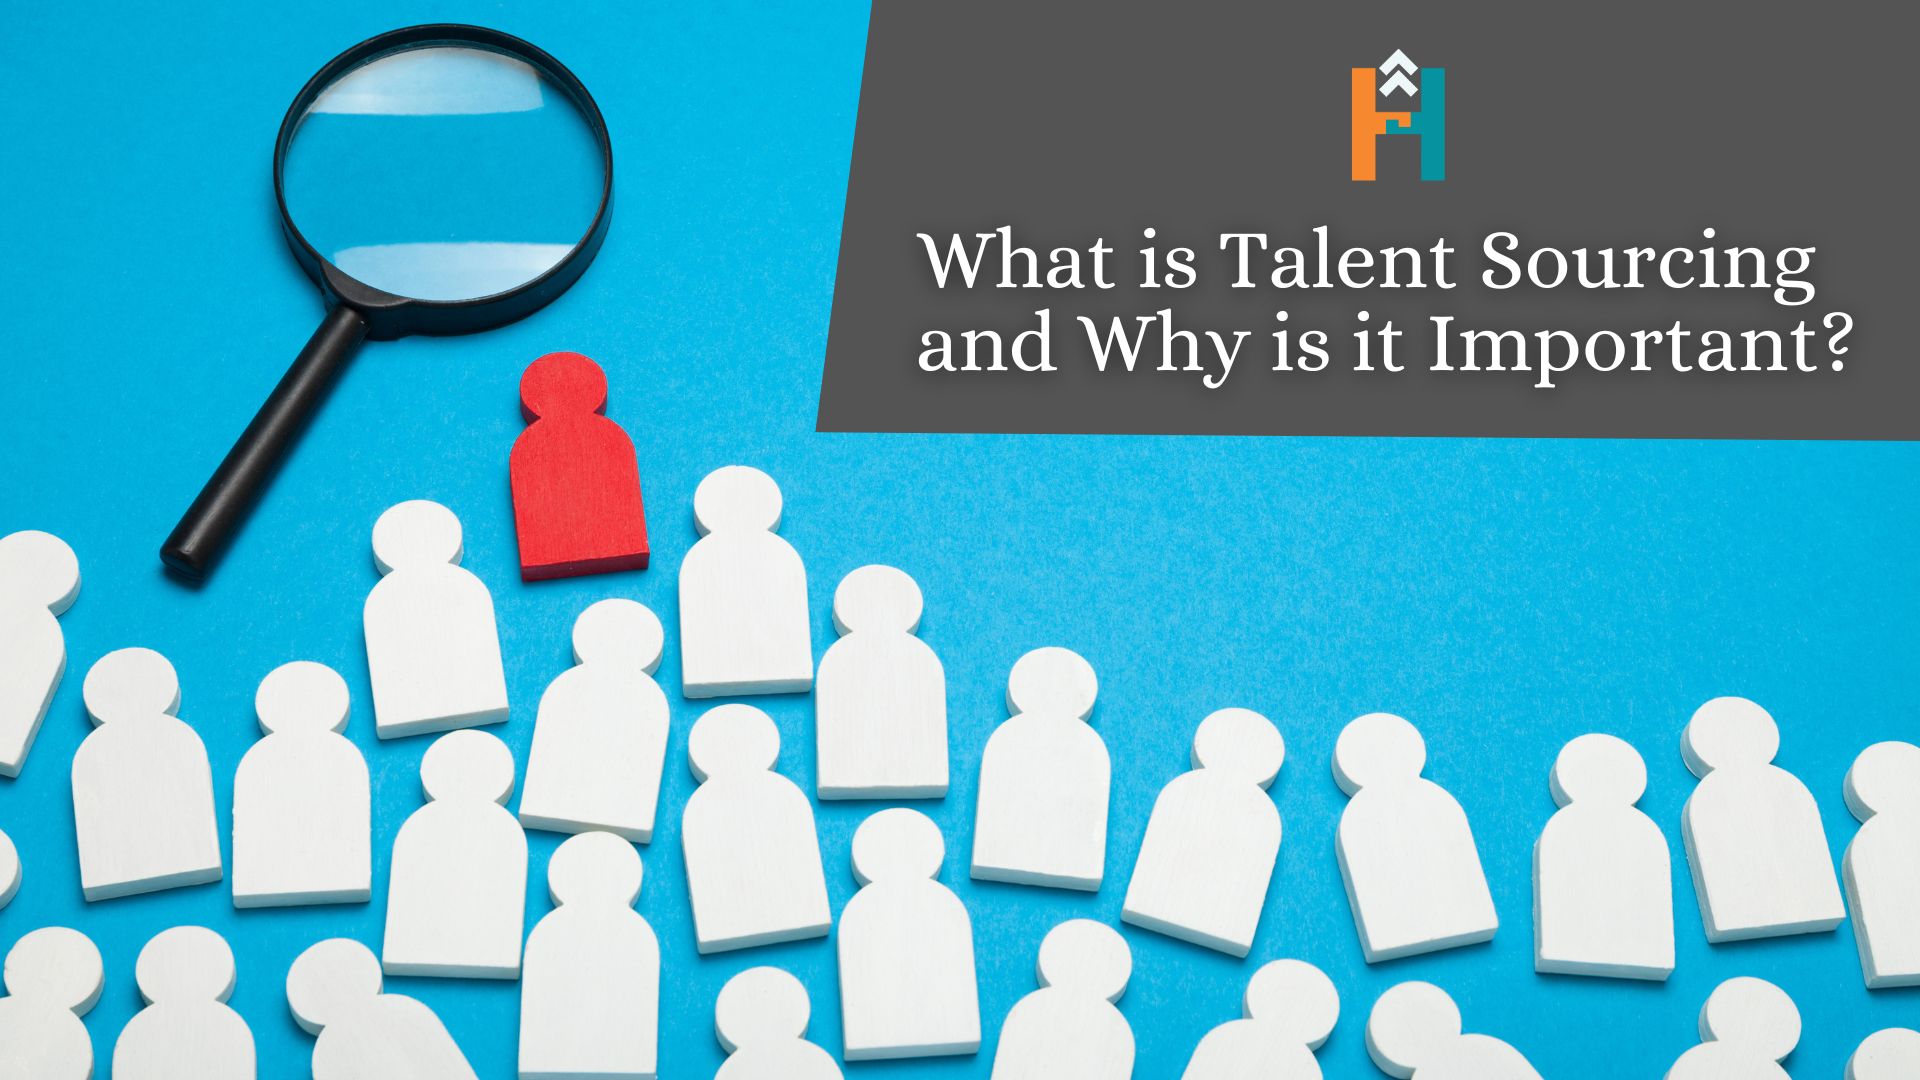 What is Talent Sourcing and Why is it Important?